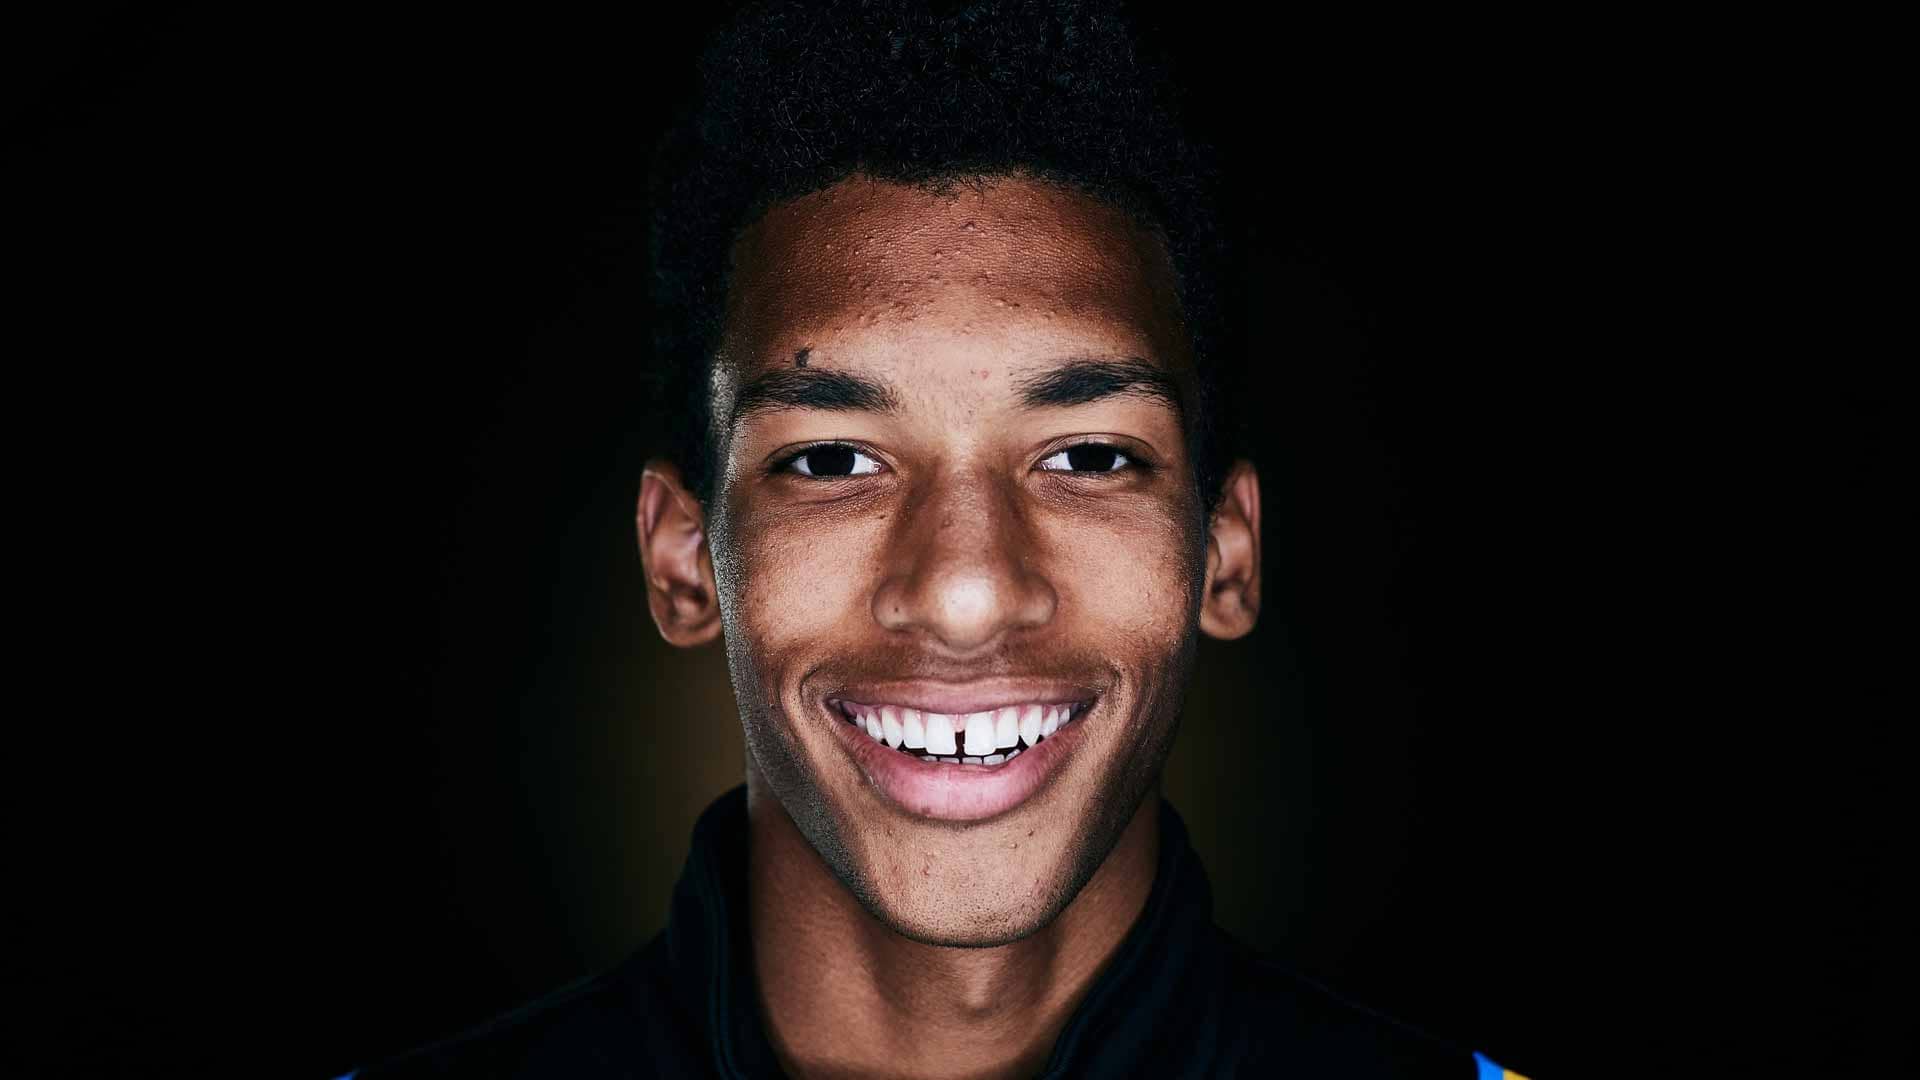 Felix Auger-Aliassime is the youngest player in the Top 50 of the FedEx ATP Rankings.